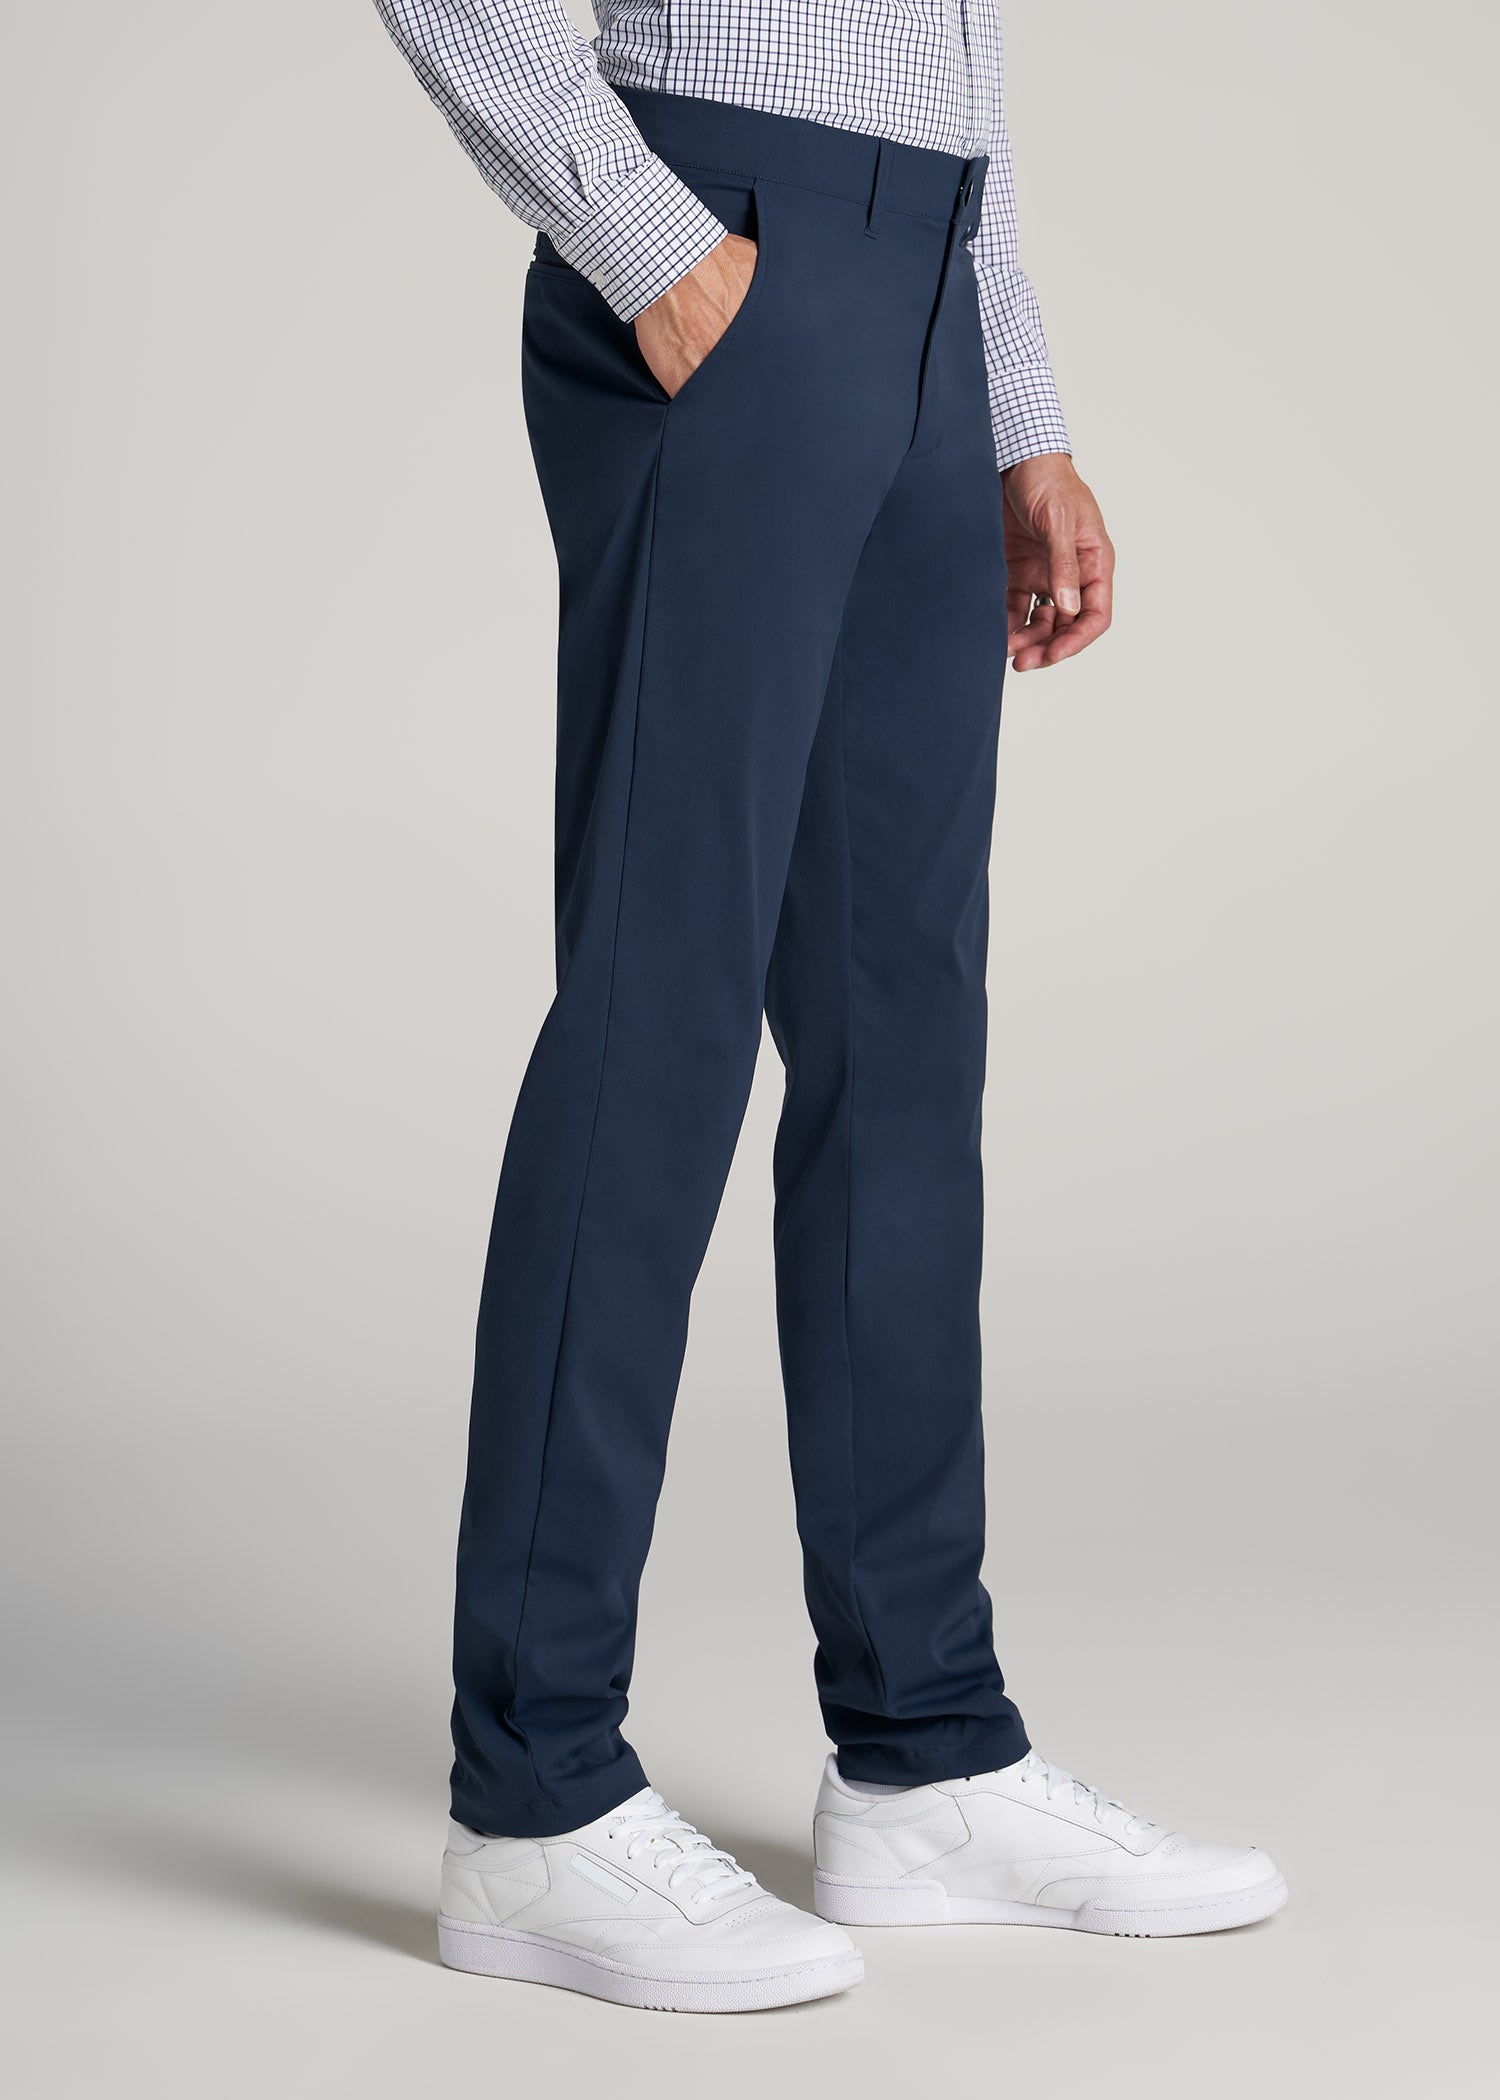 TAPERED FIT Traveler Chino Pants for Tall Men in Marine Navy